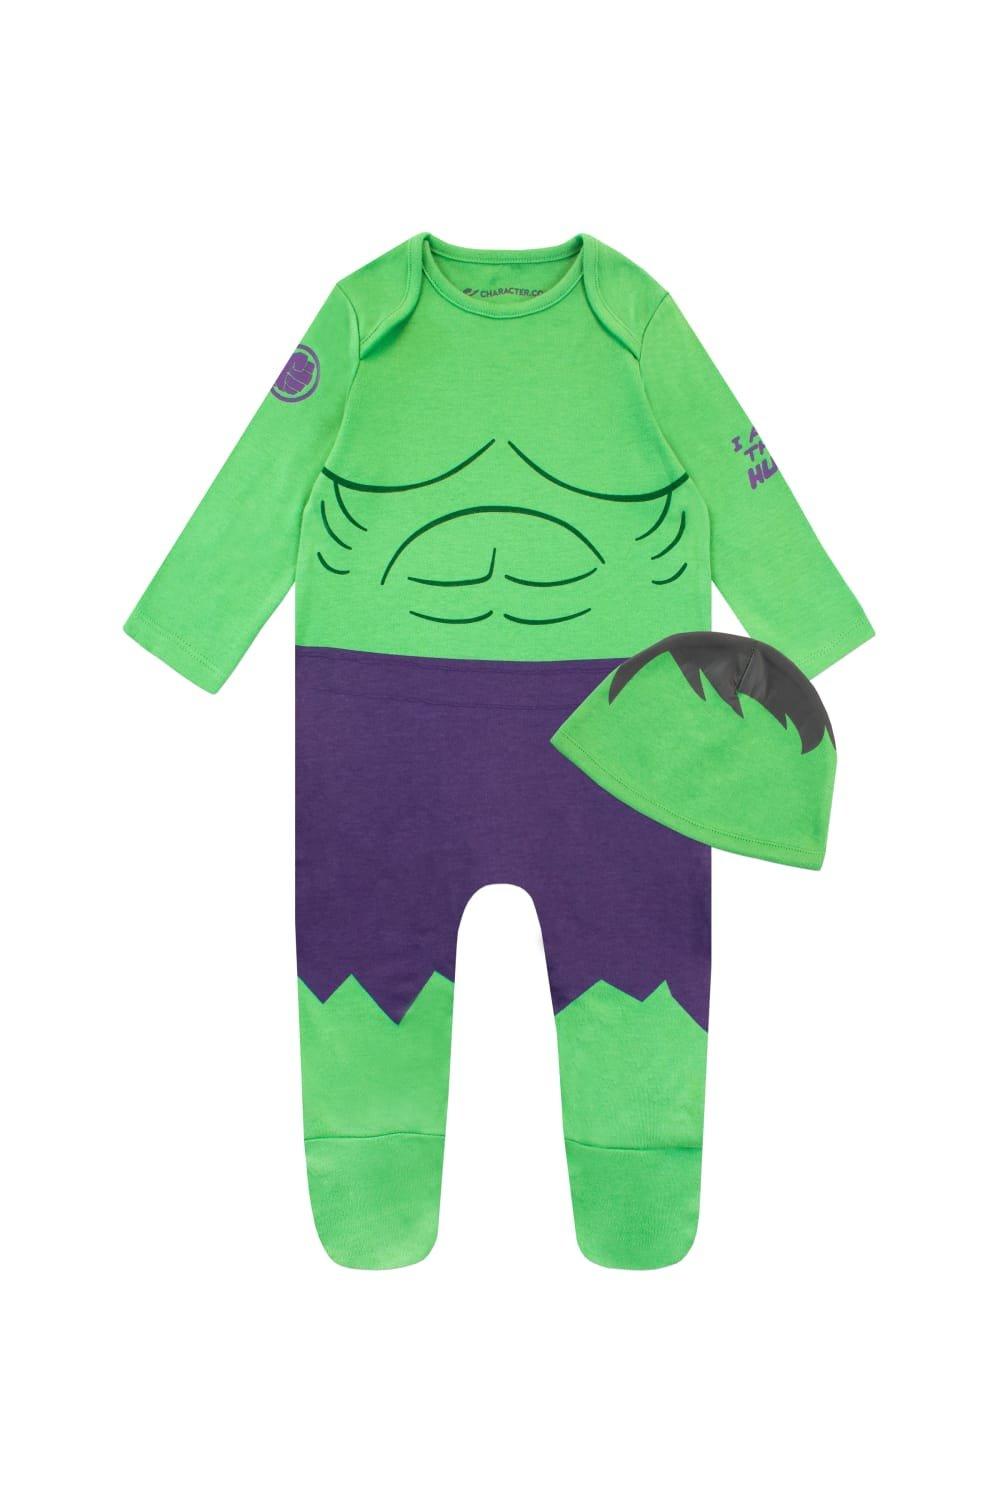 Avengers The Incredible Hulk Sleepsuit and Hat Set